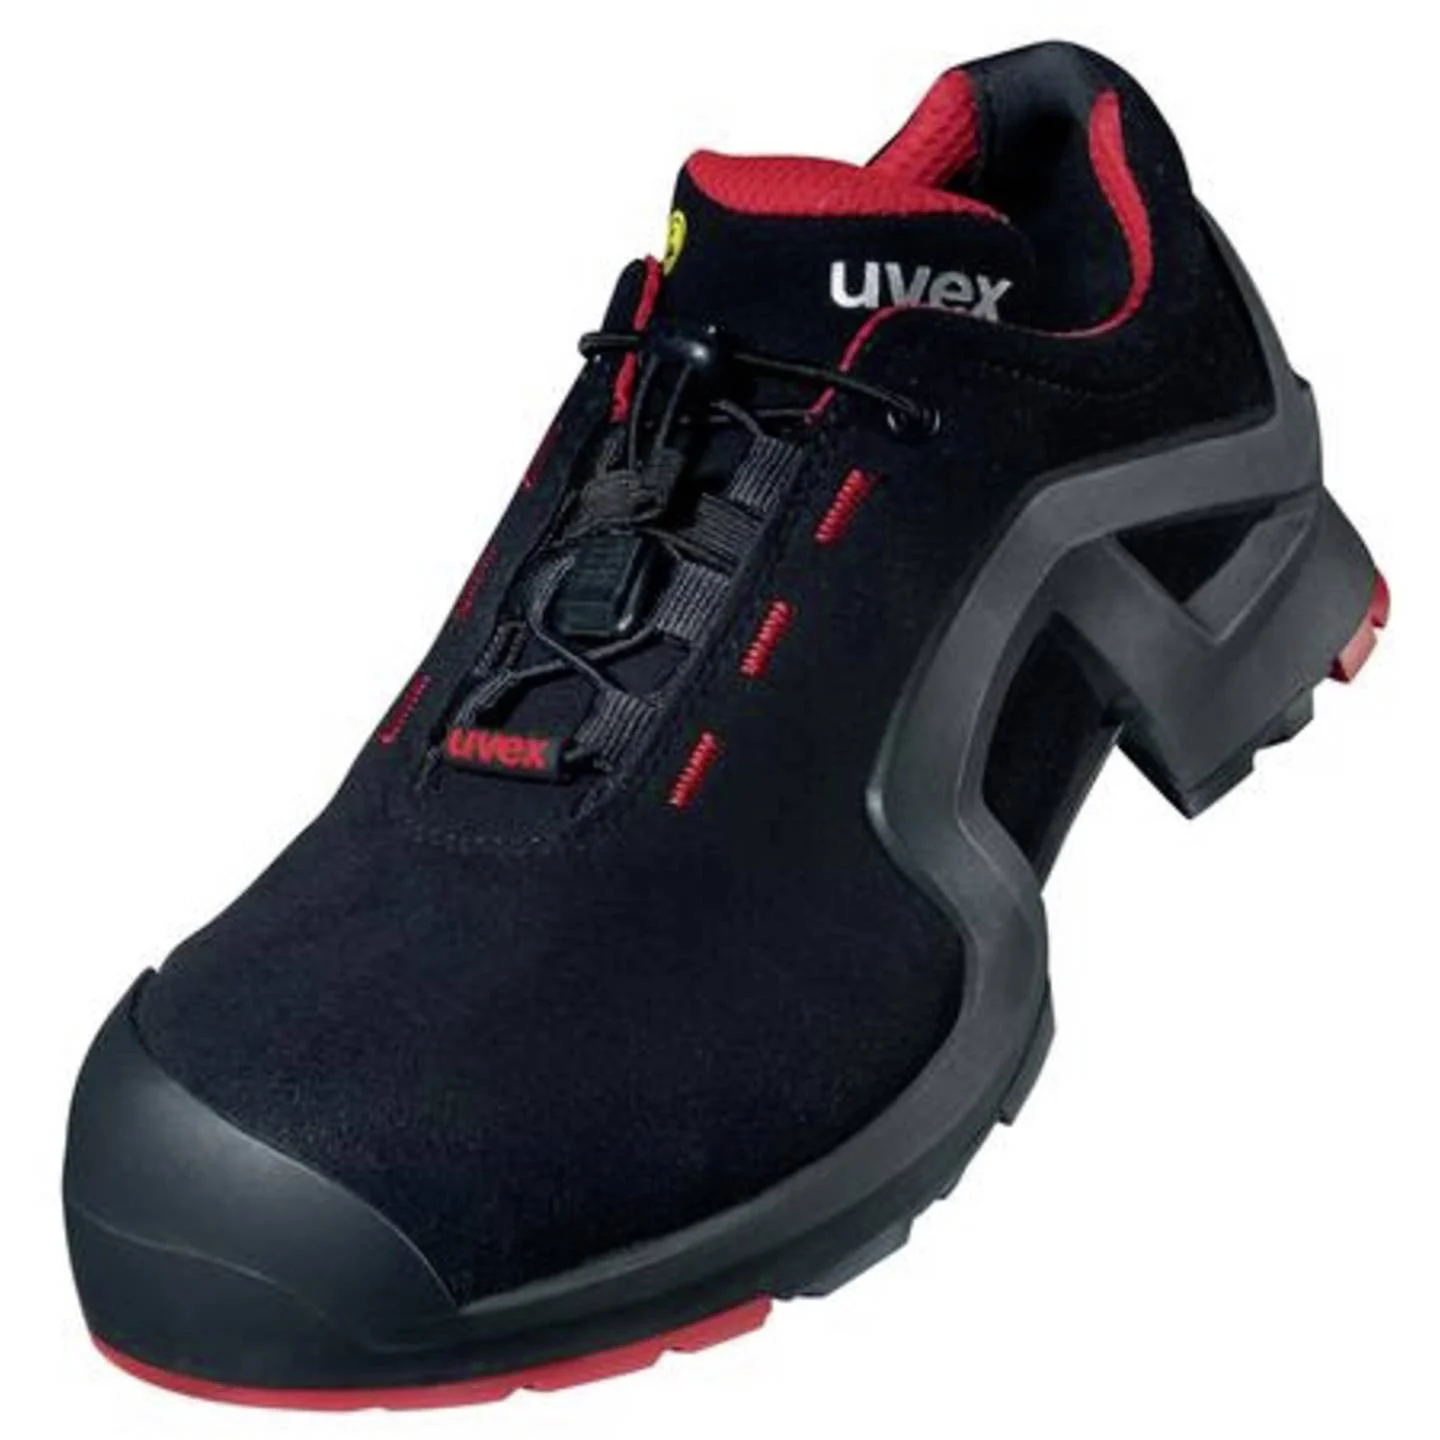 Uvex Safety shoes Low 8516.2 43 S3